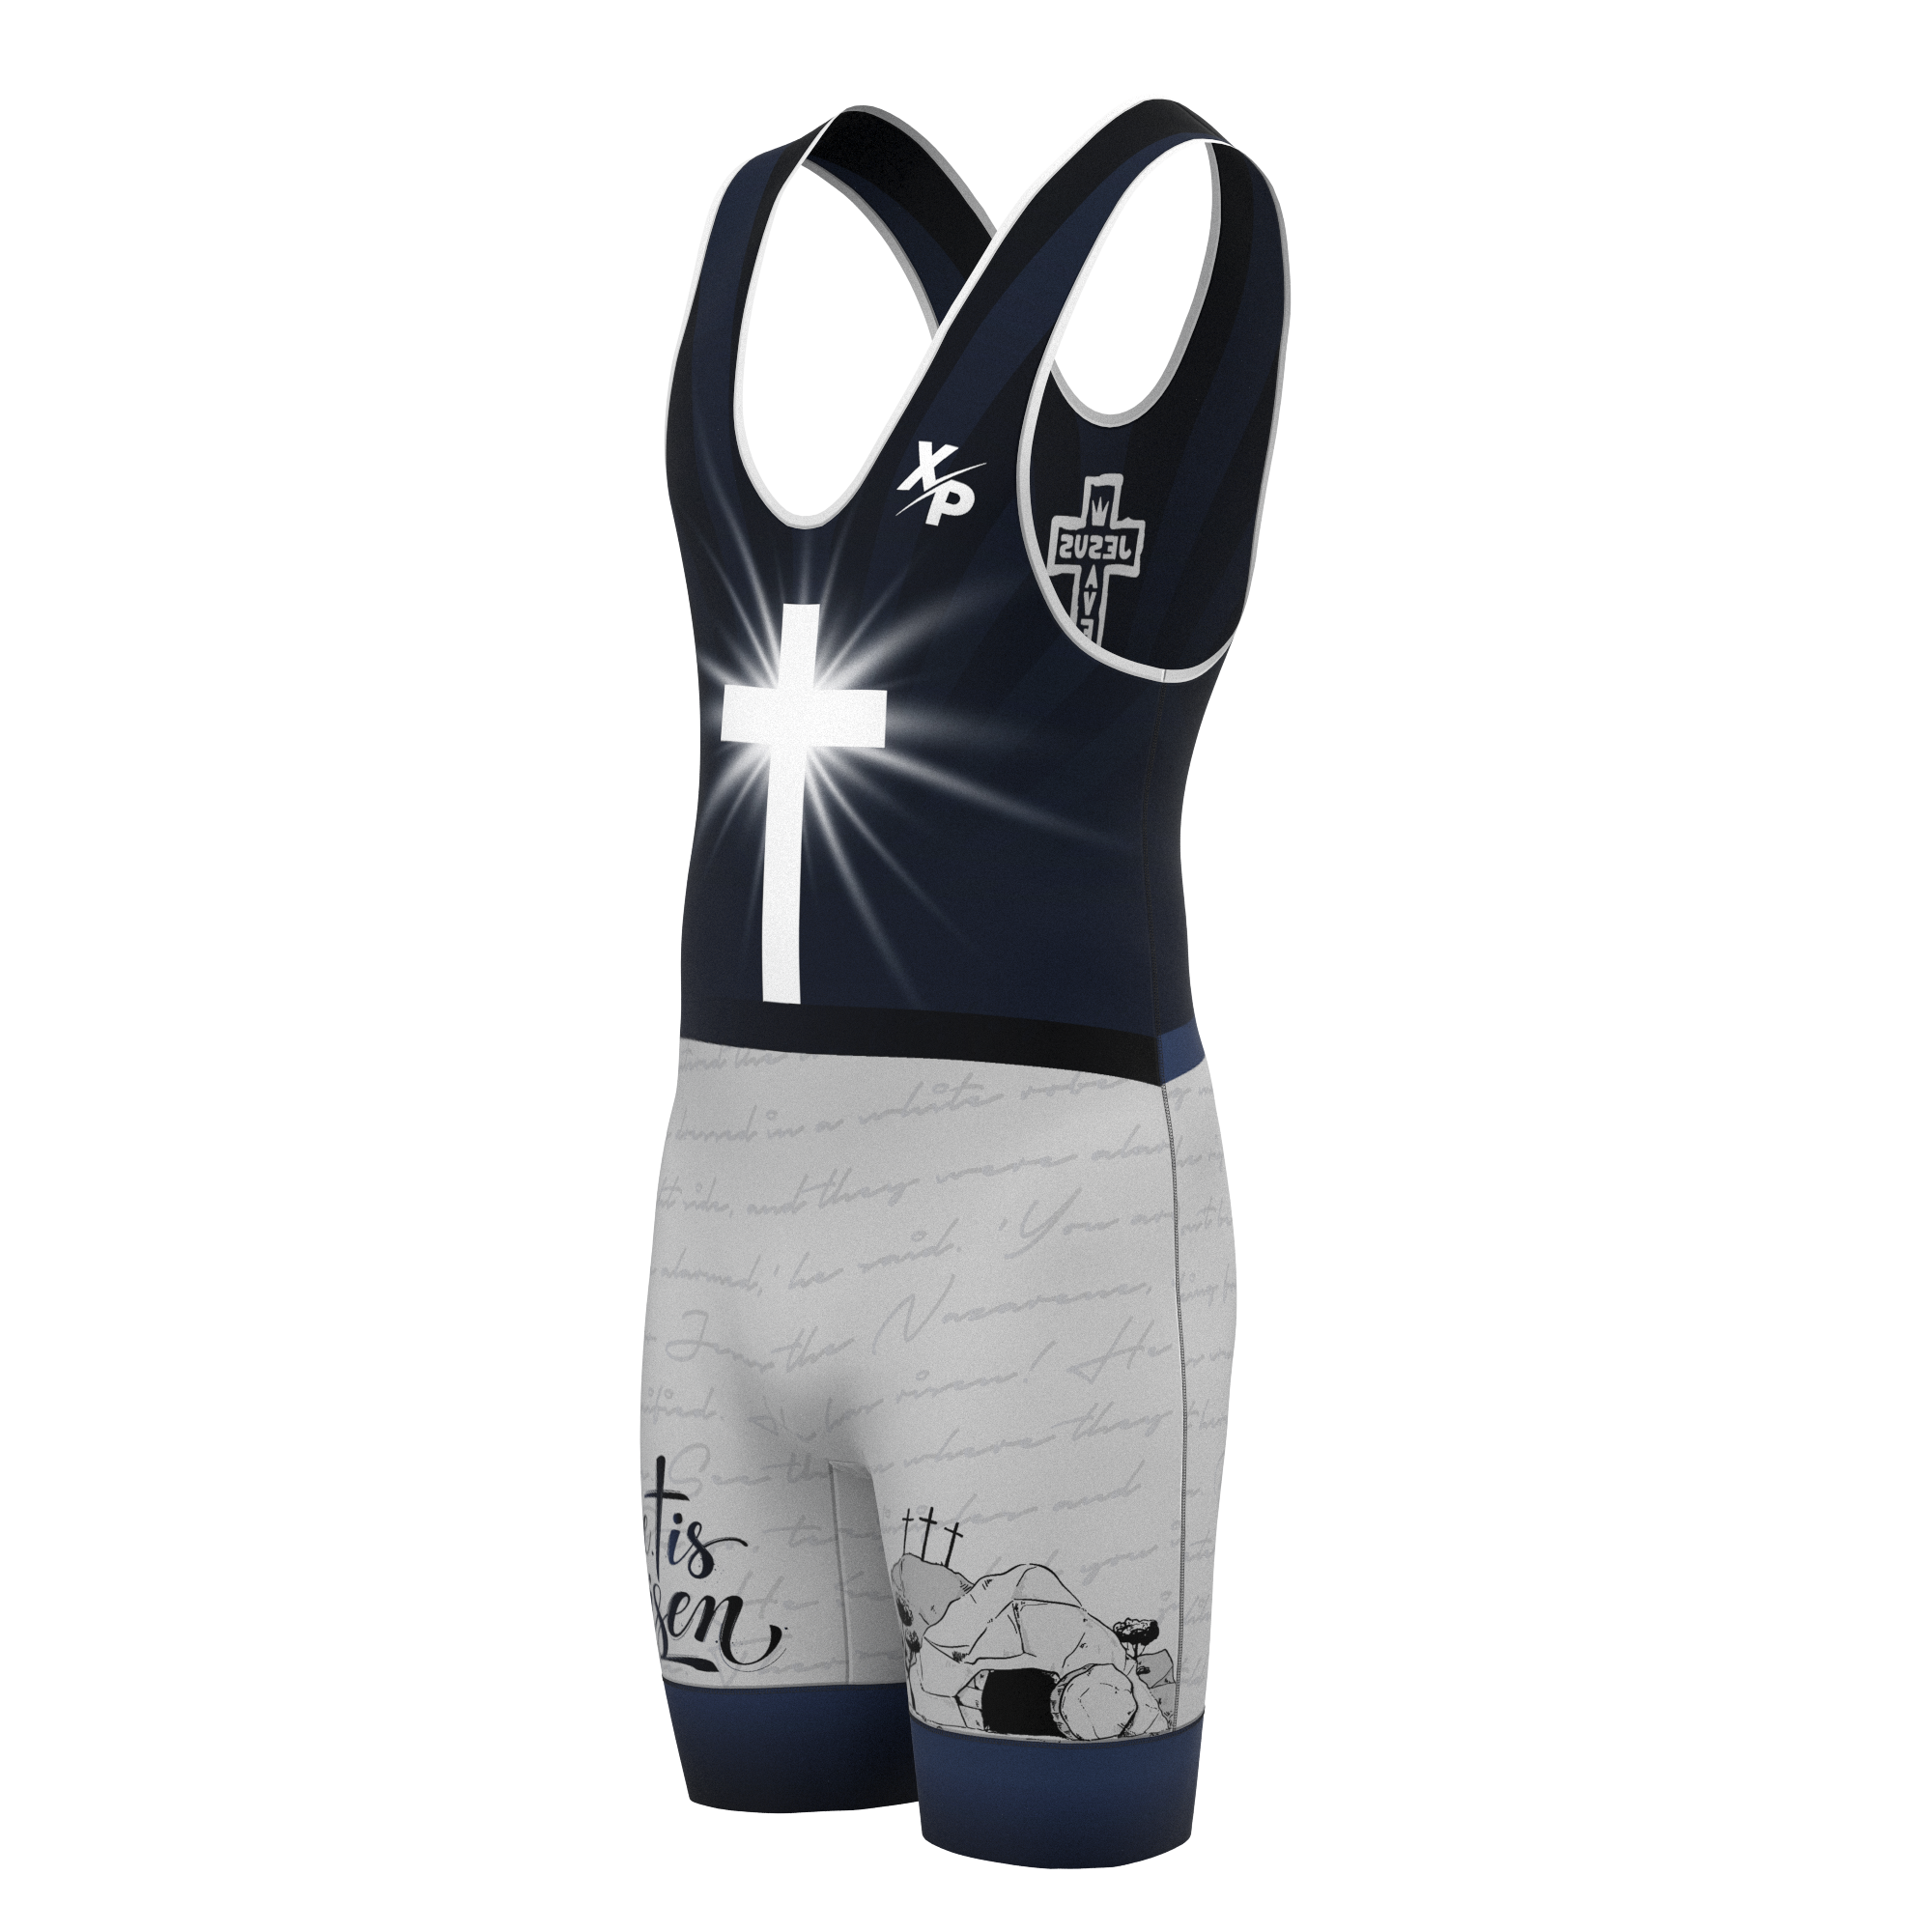 Christ Is Risen Fully Sublimated Wrestling Singlet in Black- Silver Xtreme Pro Apparel